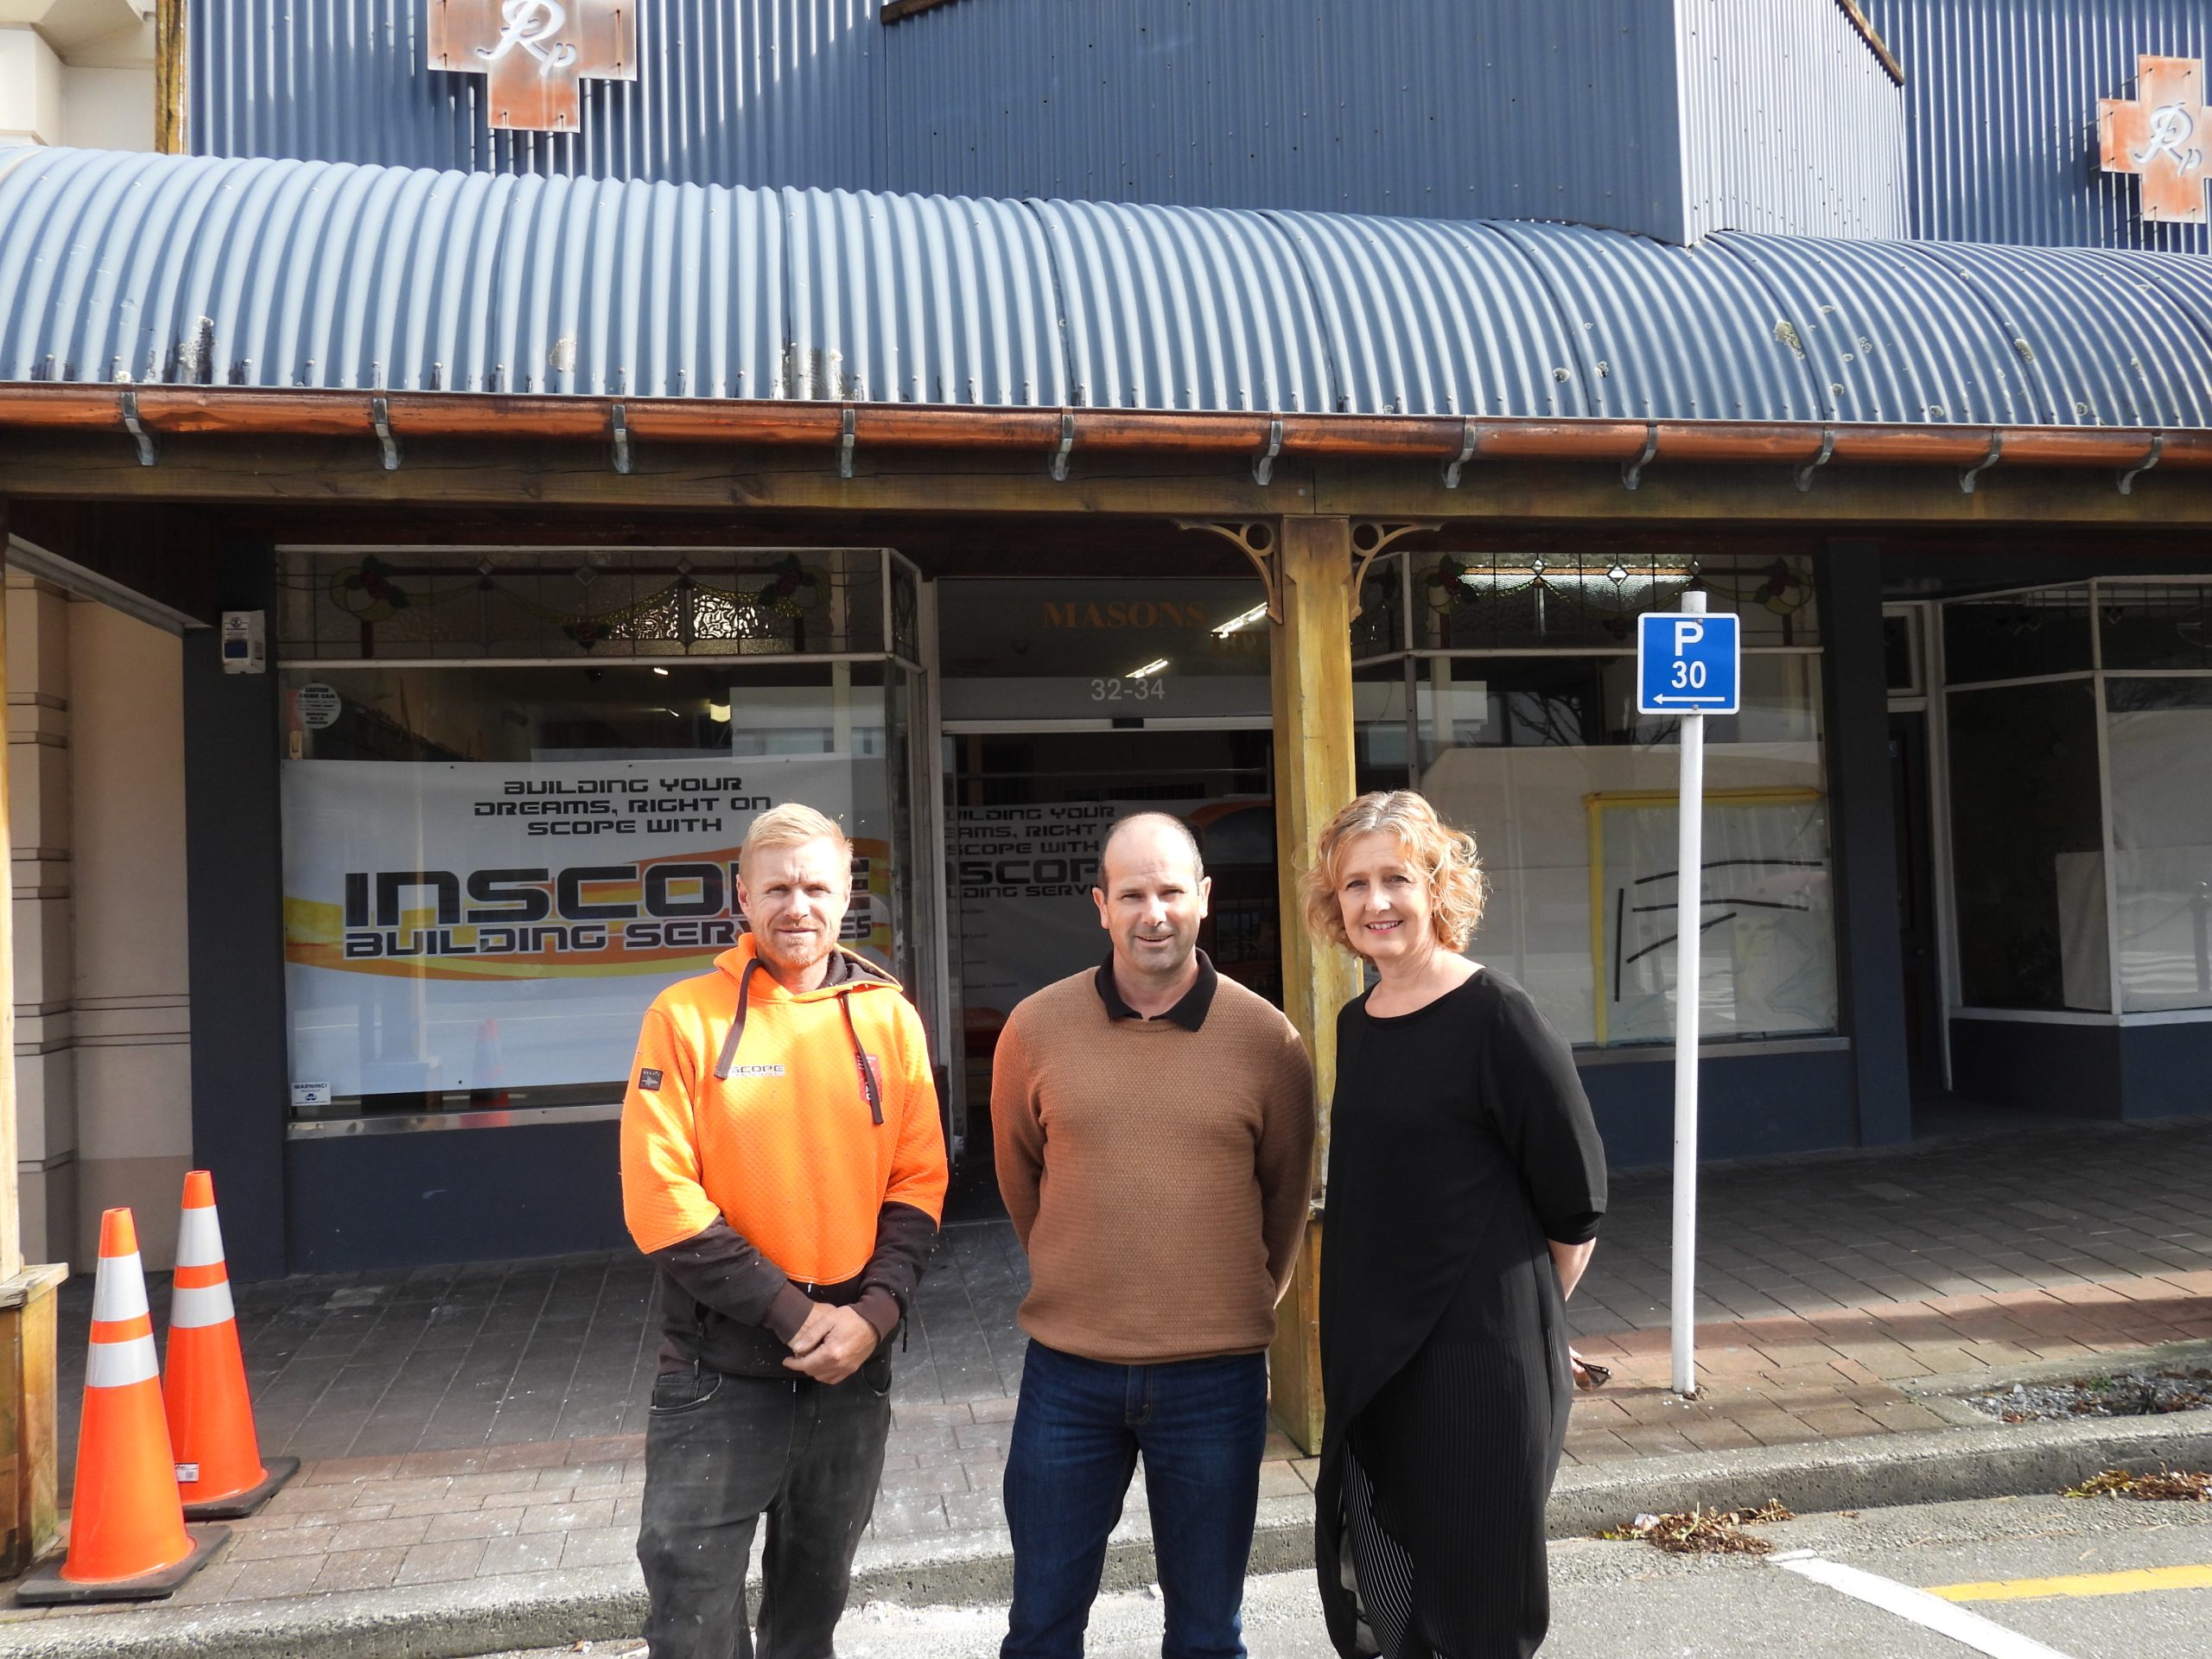 Couple save heritage store - Greymouth Star